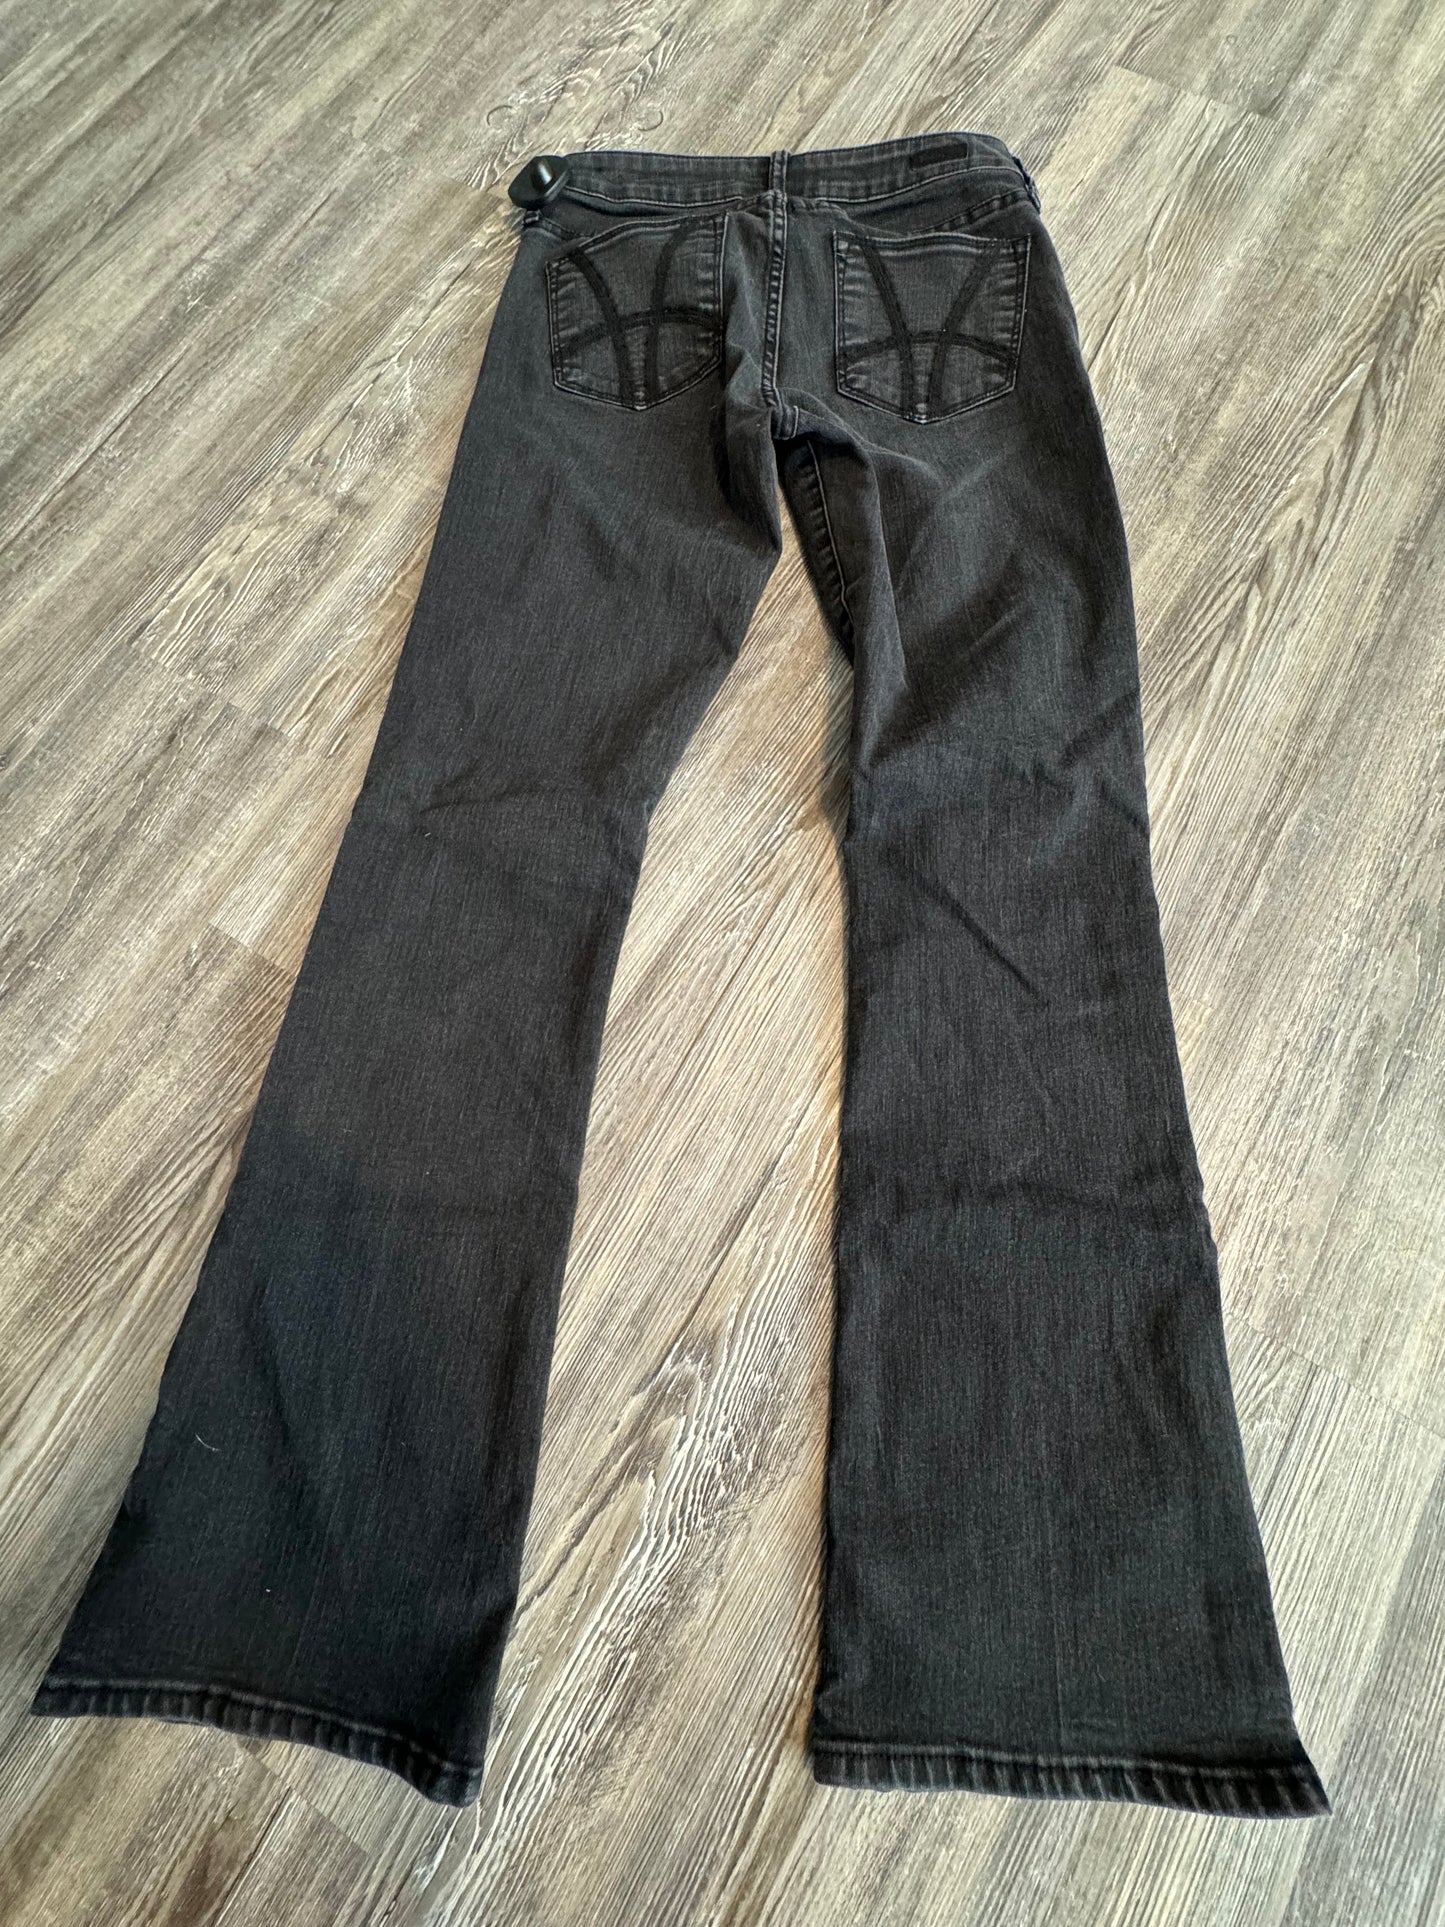 Jeans Boot Cut By Kut  Size: 4